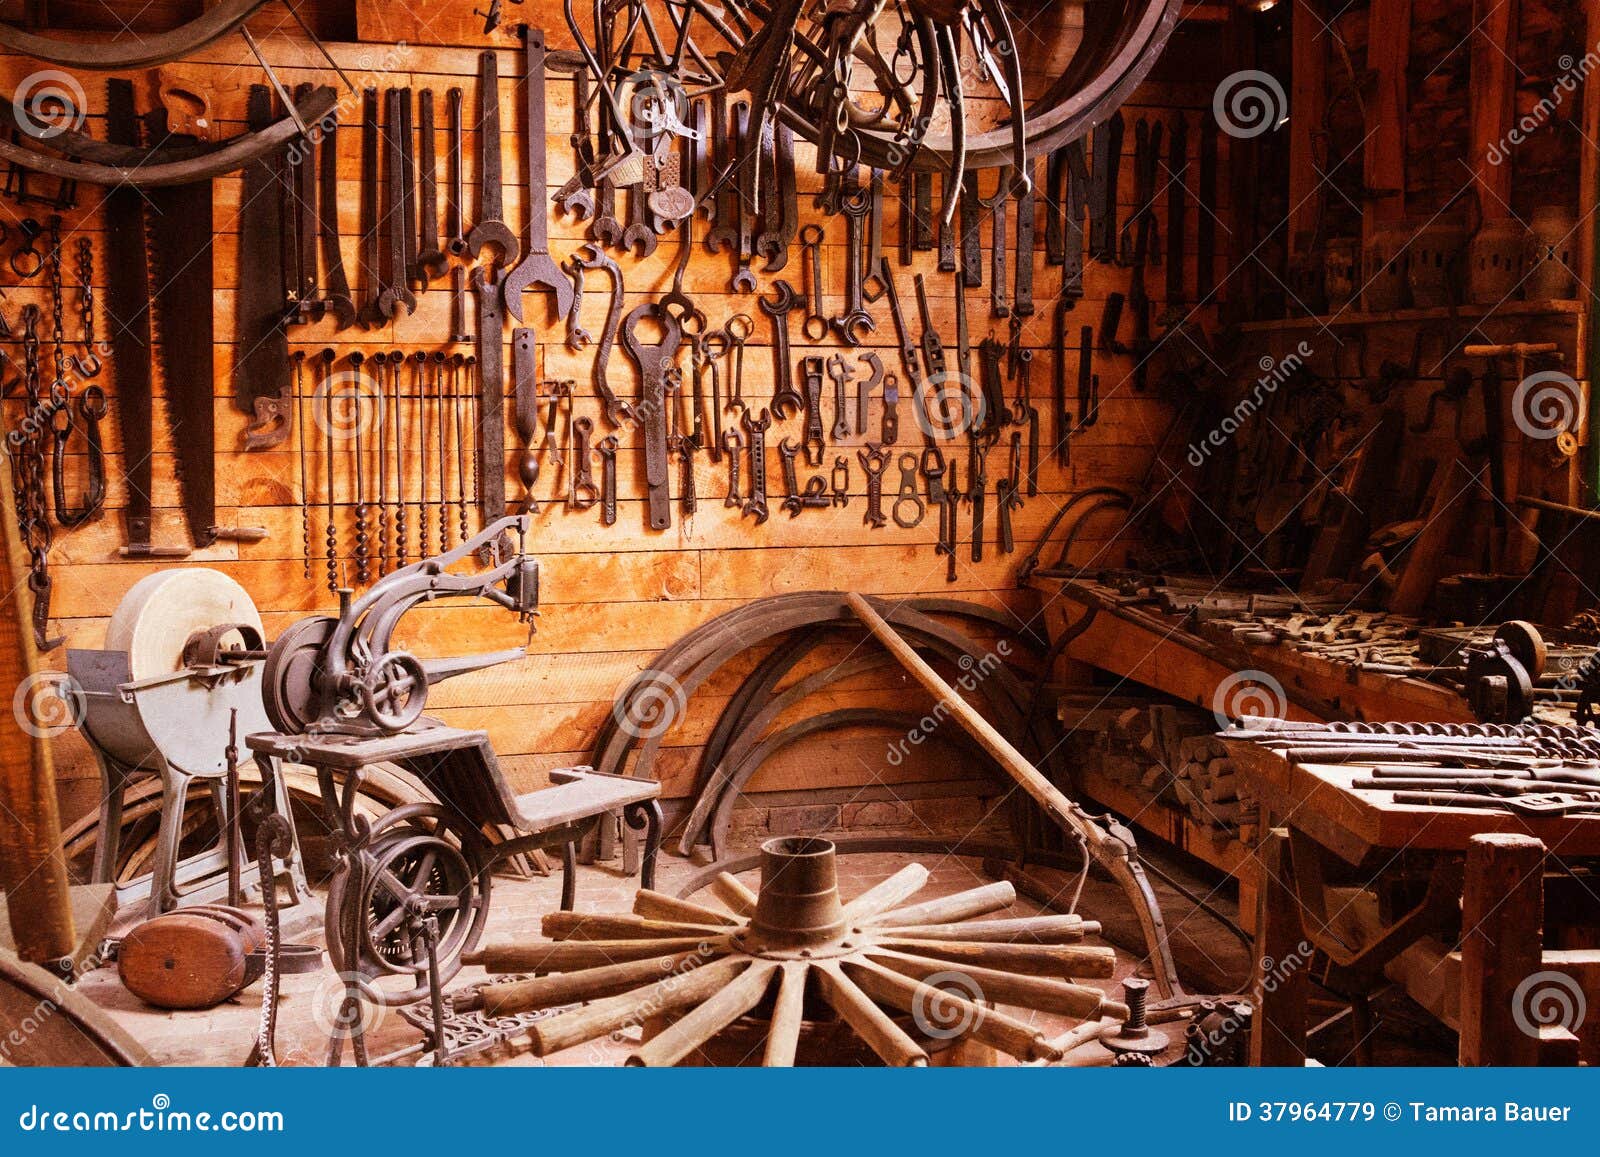 pioneer tool shed royalty free stock images - image: 37964779